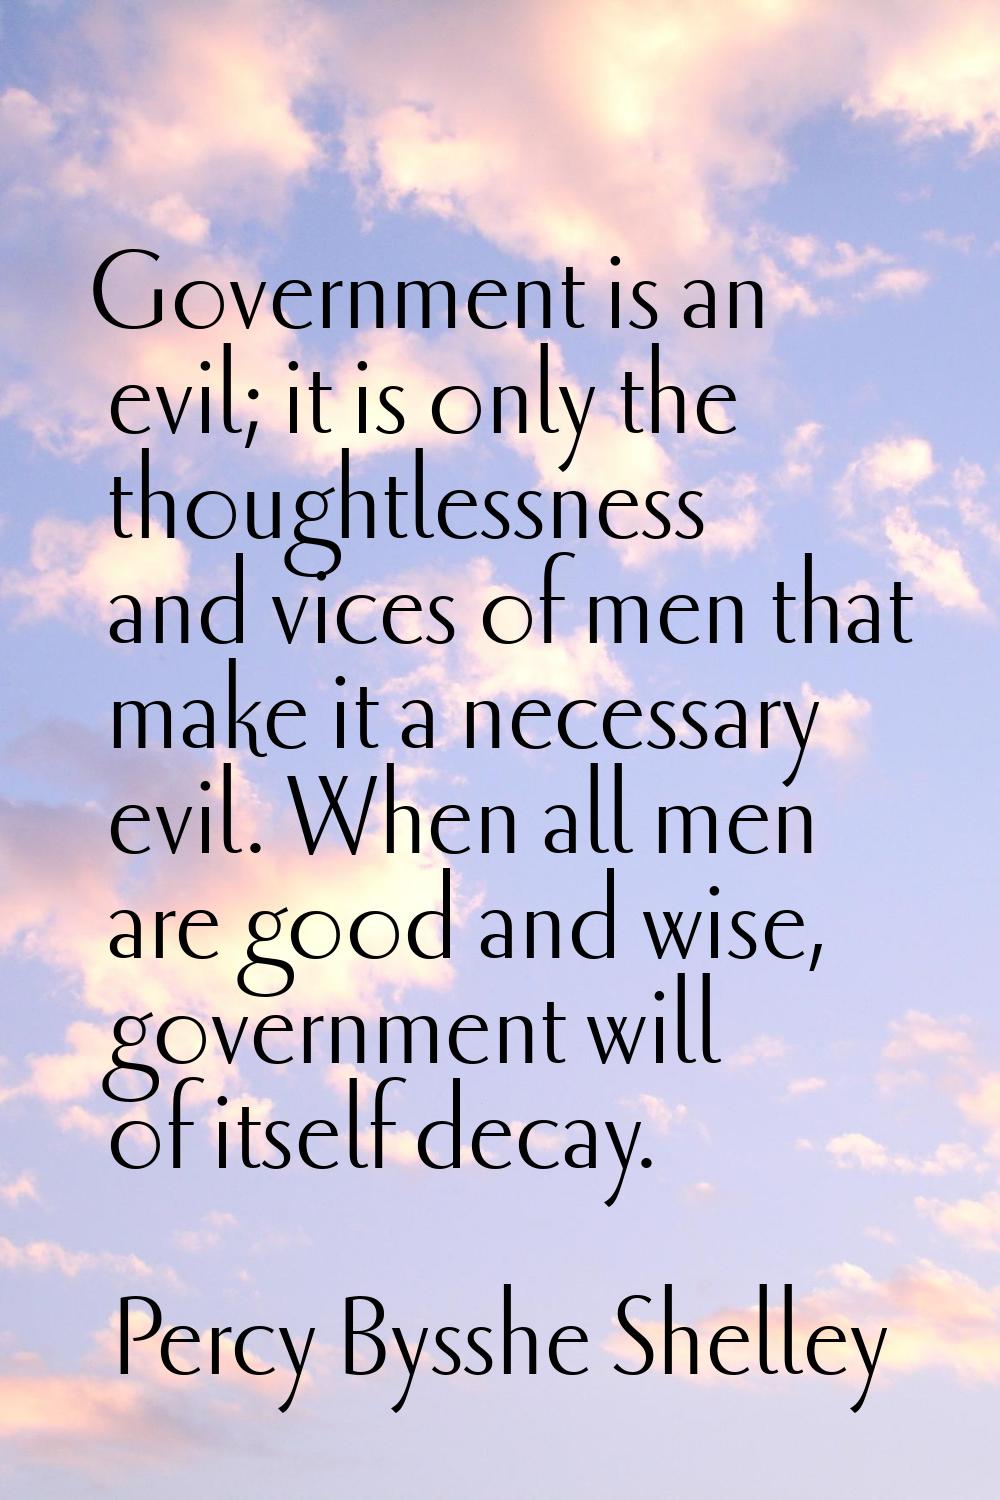 Government is an evil; it is only the thoughtlessness and vices of men that make it a necessary evi